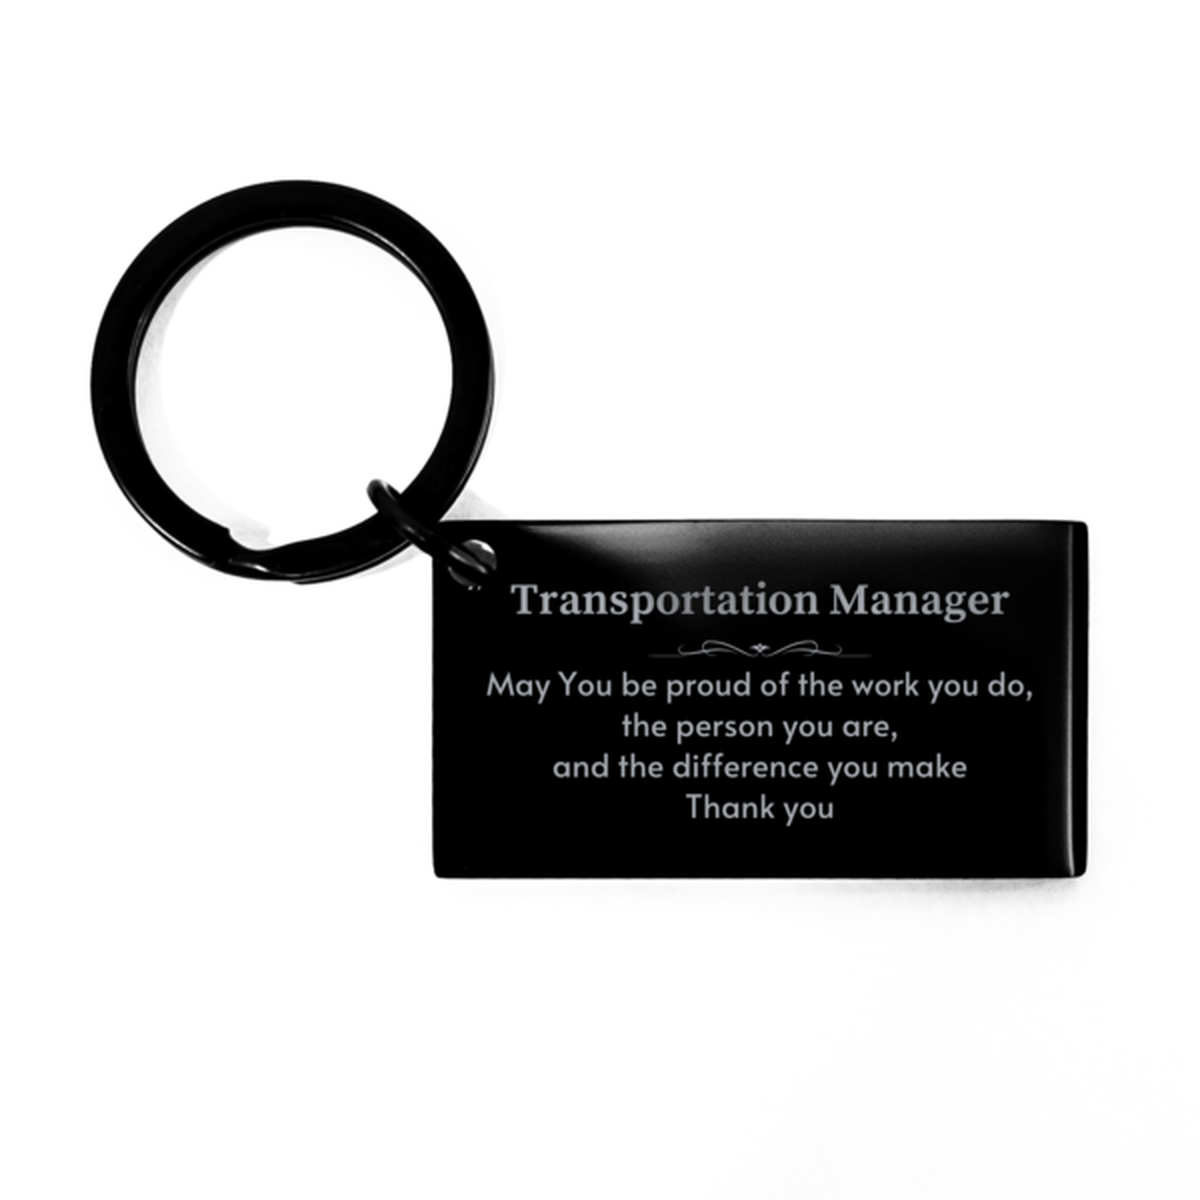 Heartwarming Keychain Retirement Coworkers Gifts for Transportation Manager, Actuary May You be proud of the work you do, the person you are Gifts for Boss Men Women Friends